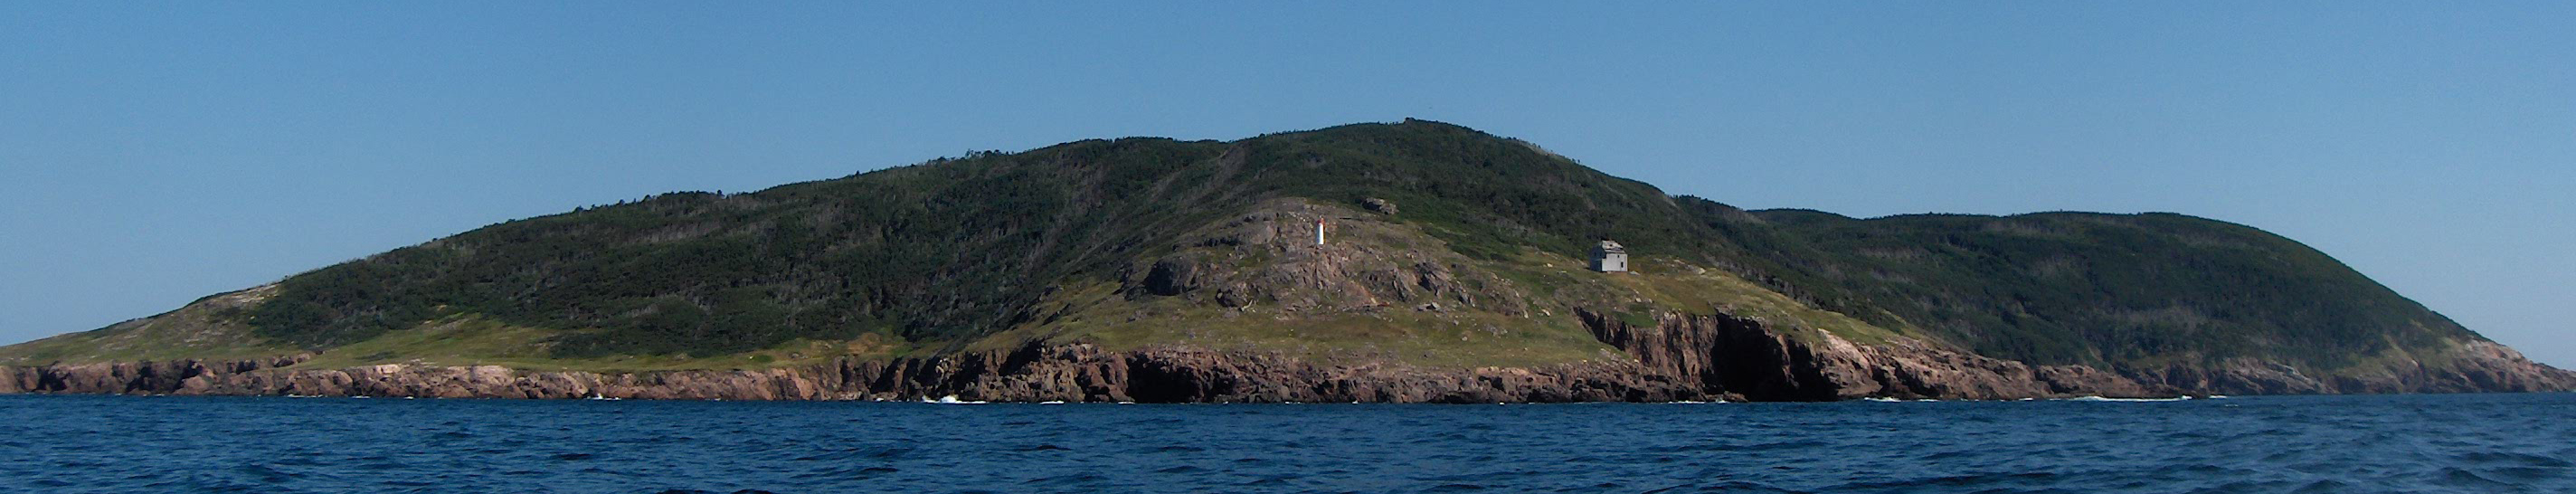 Looking at South Point of St. Paul Island on a sunny day.